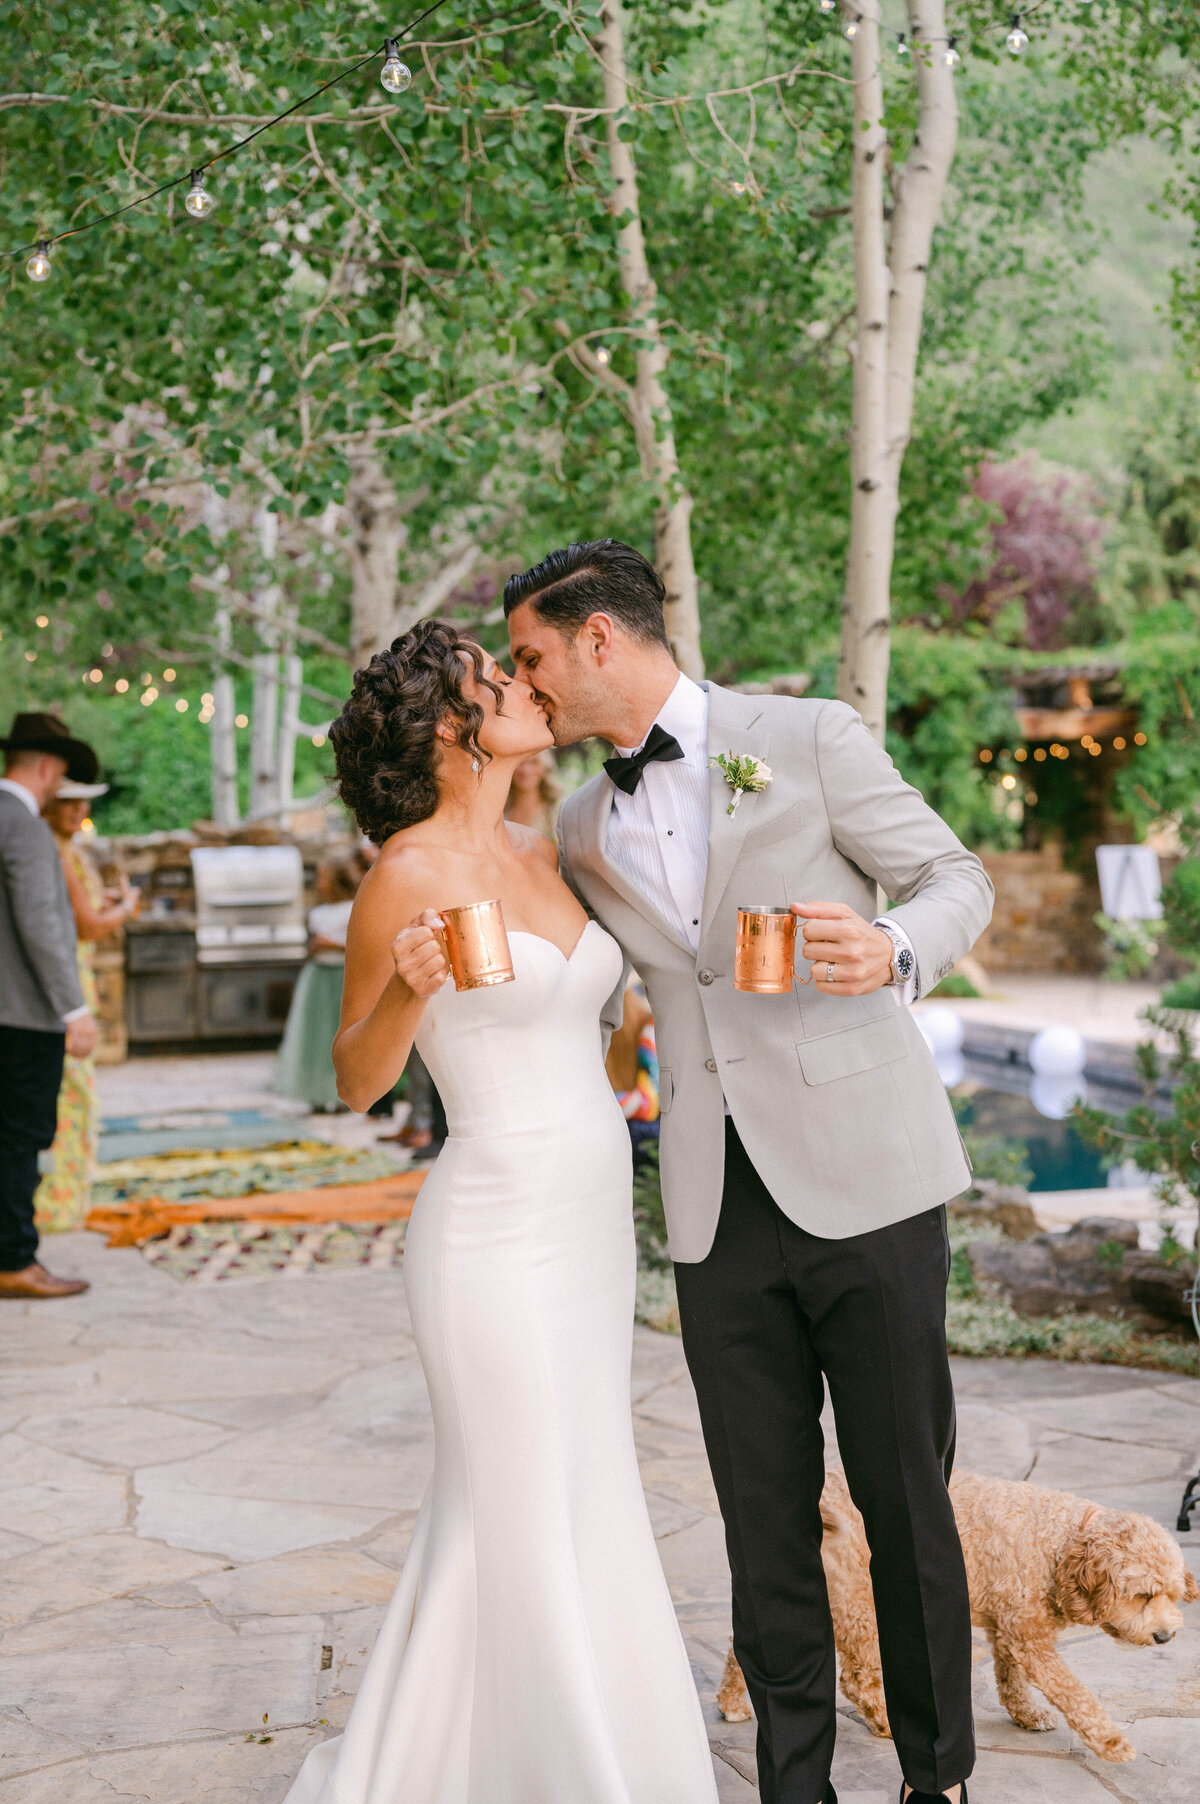 Lia-Ross-Aspen-Snowmass-Patak-Ranch-Wedding-Photography-by-Jacie-Marguerite-668